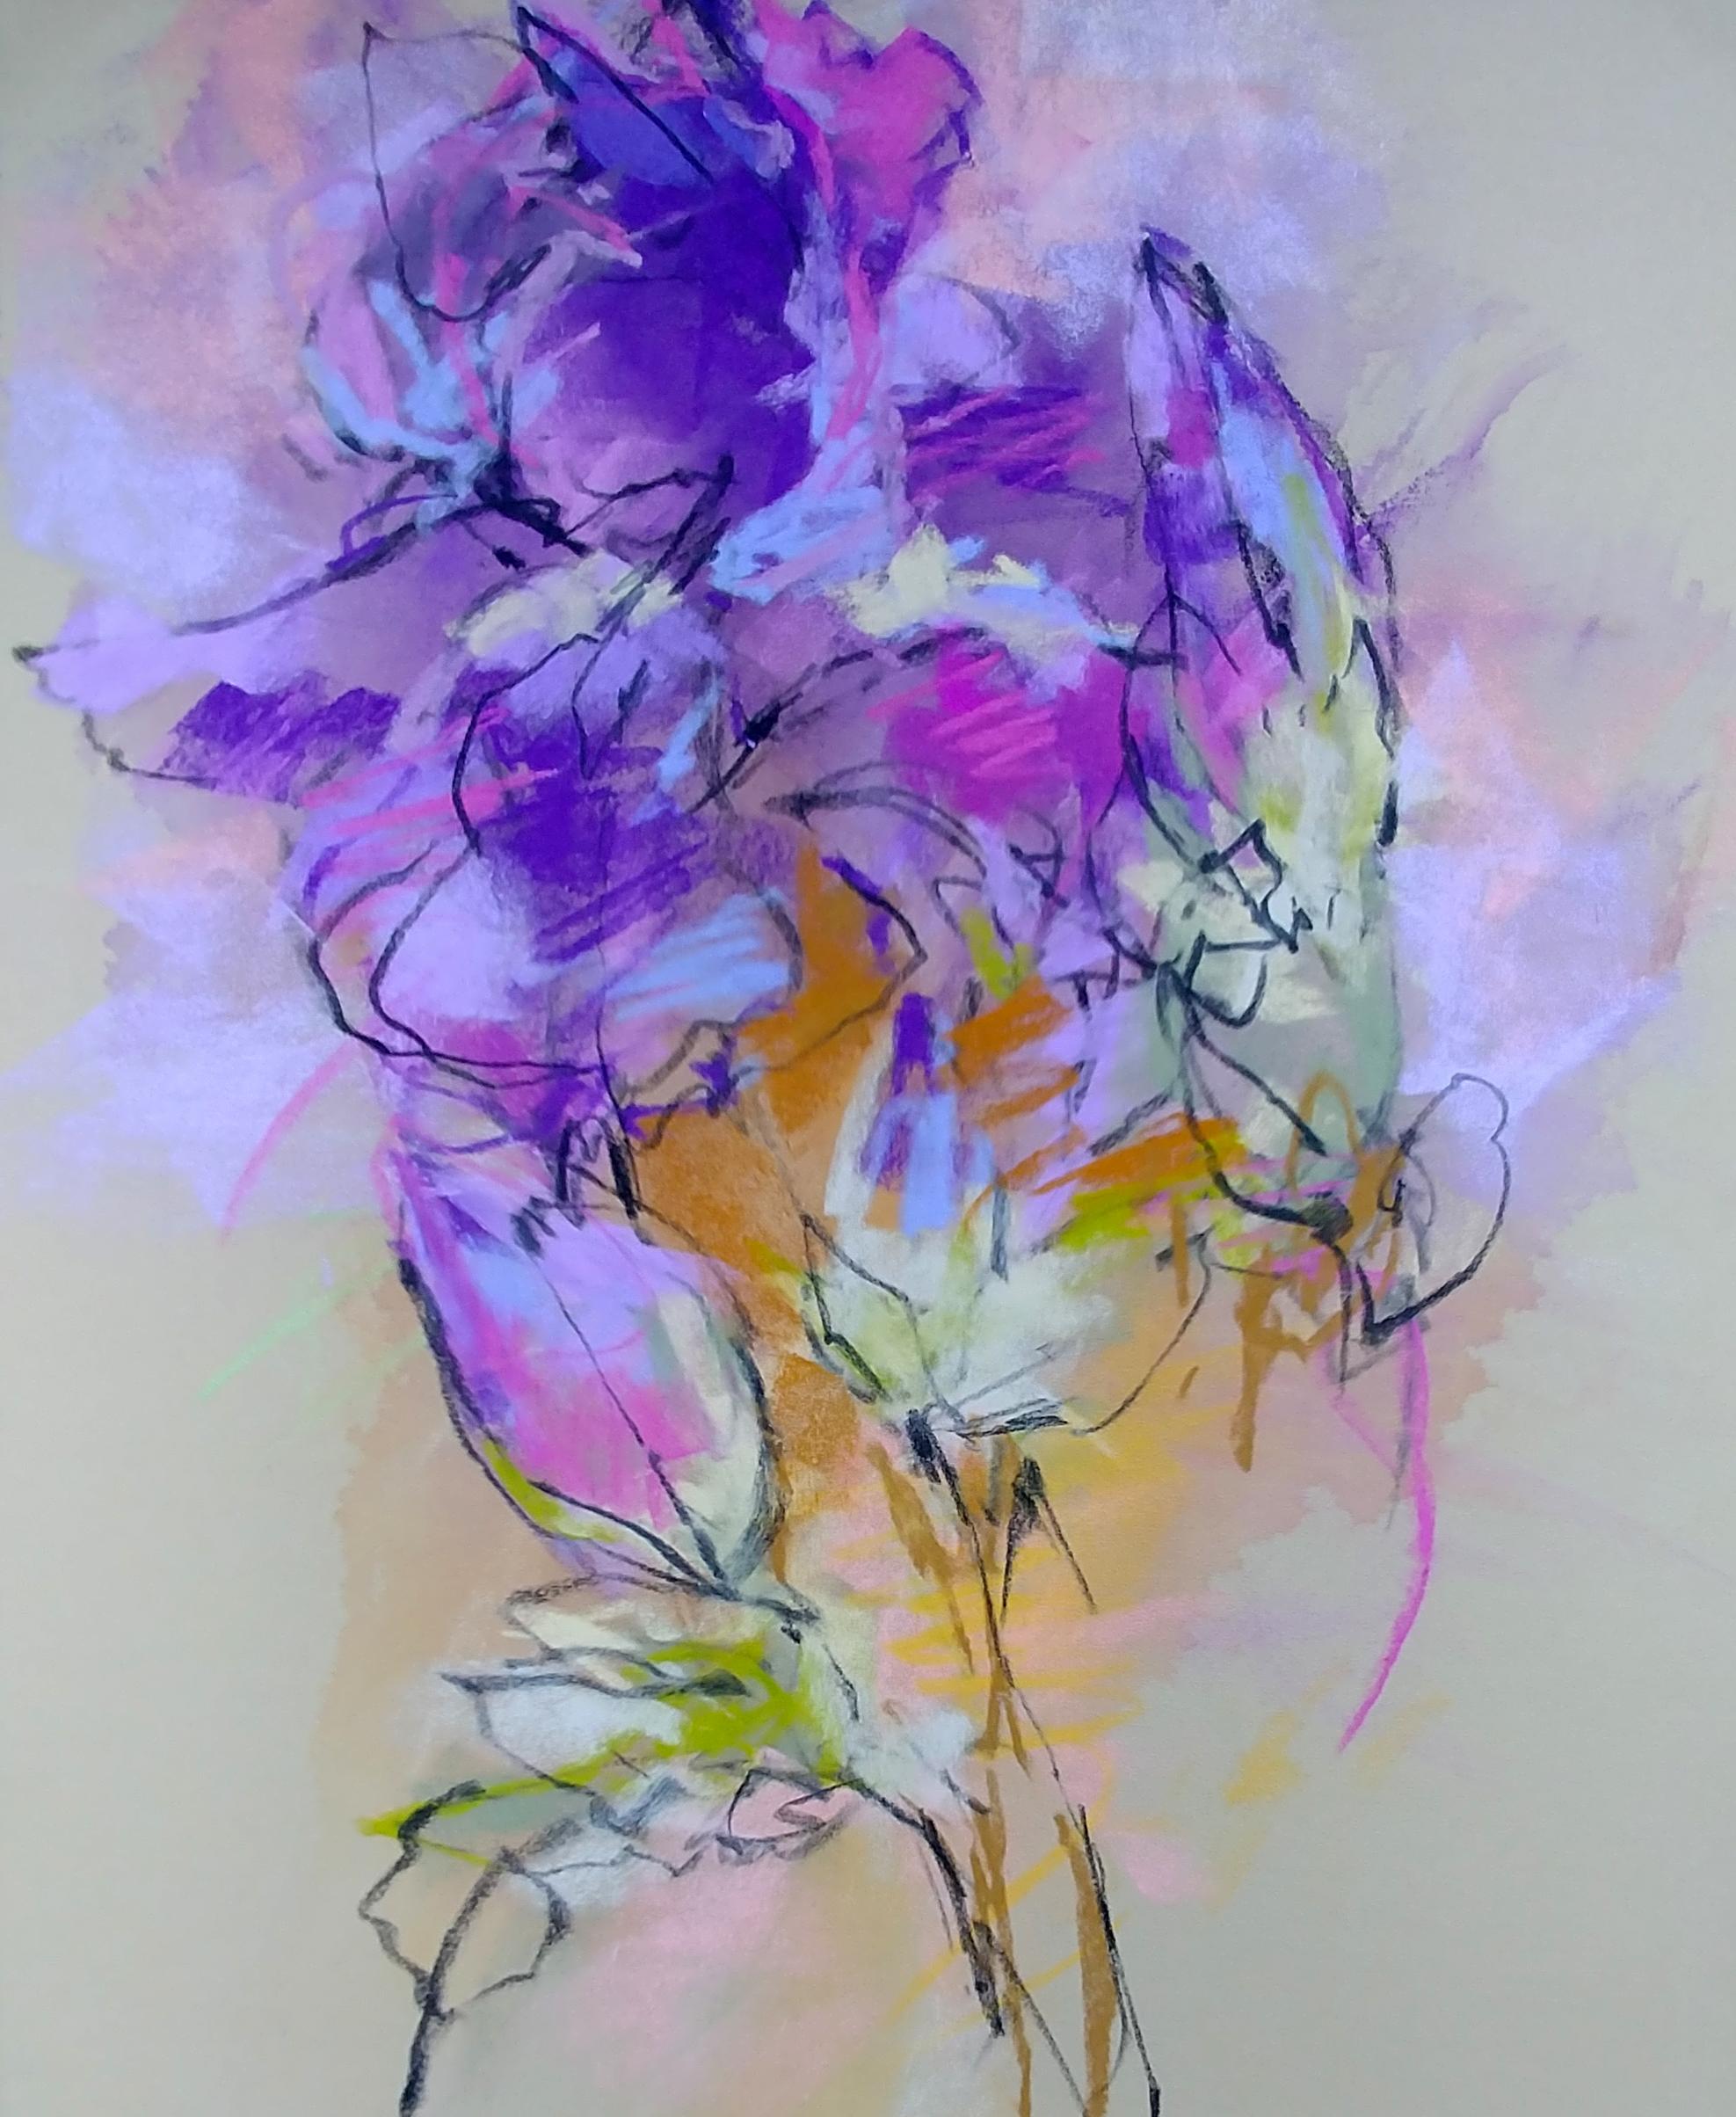 'Monet's Irises I' is a small abstract pastel and mixed media on paper still-life painting of vertical format created by American artist Debora Stewart in 2019. Featuring a vibrant palette made of purple, violet, green and pink tones, this framed